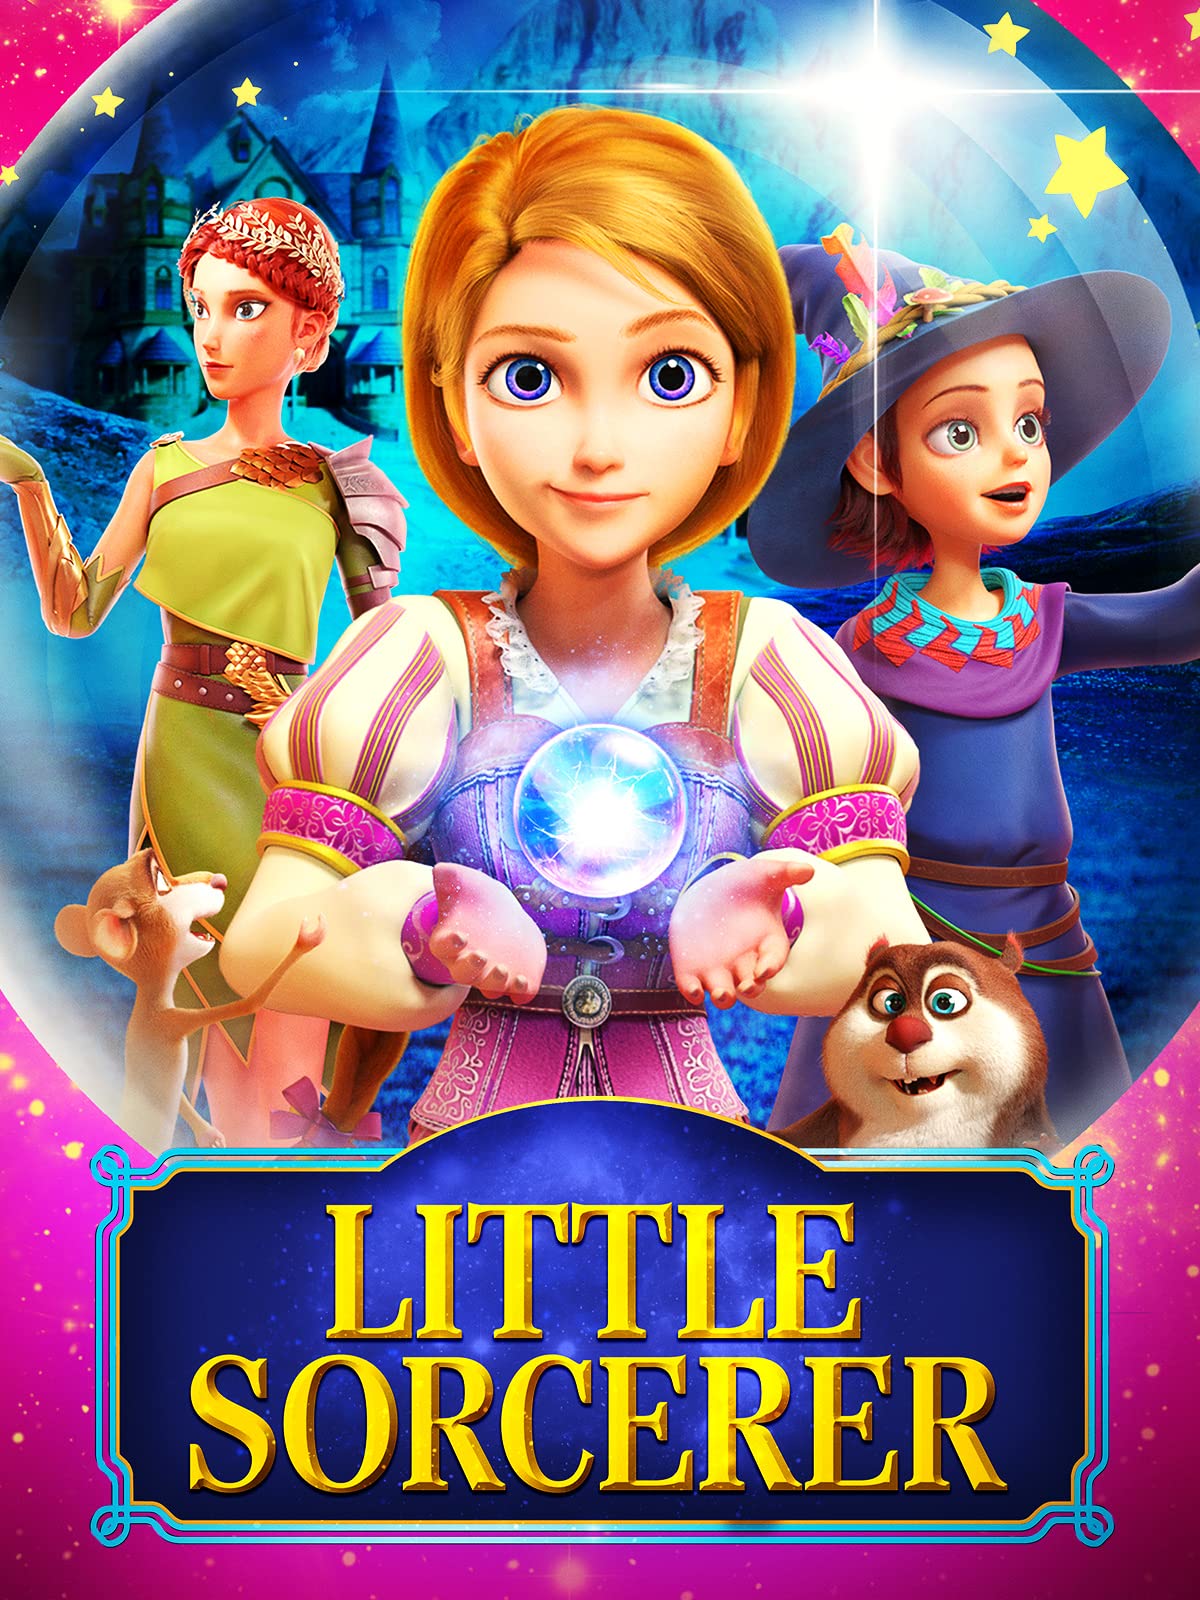 Little Sorcerer 2022 English Movie 480p HDRip 300MB Download